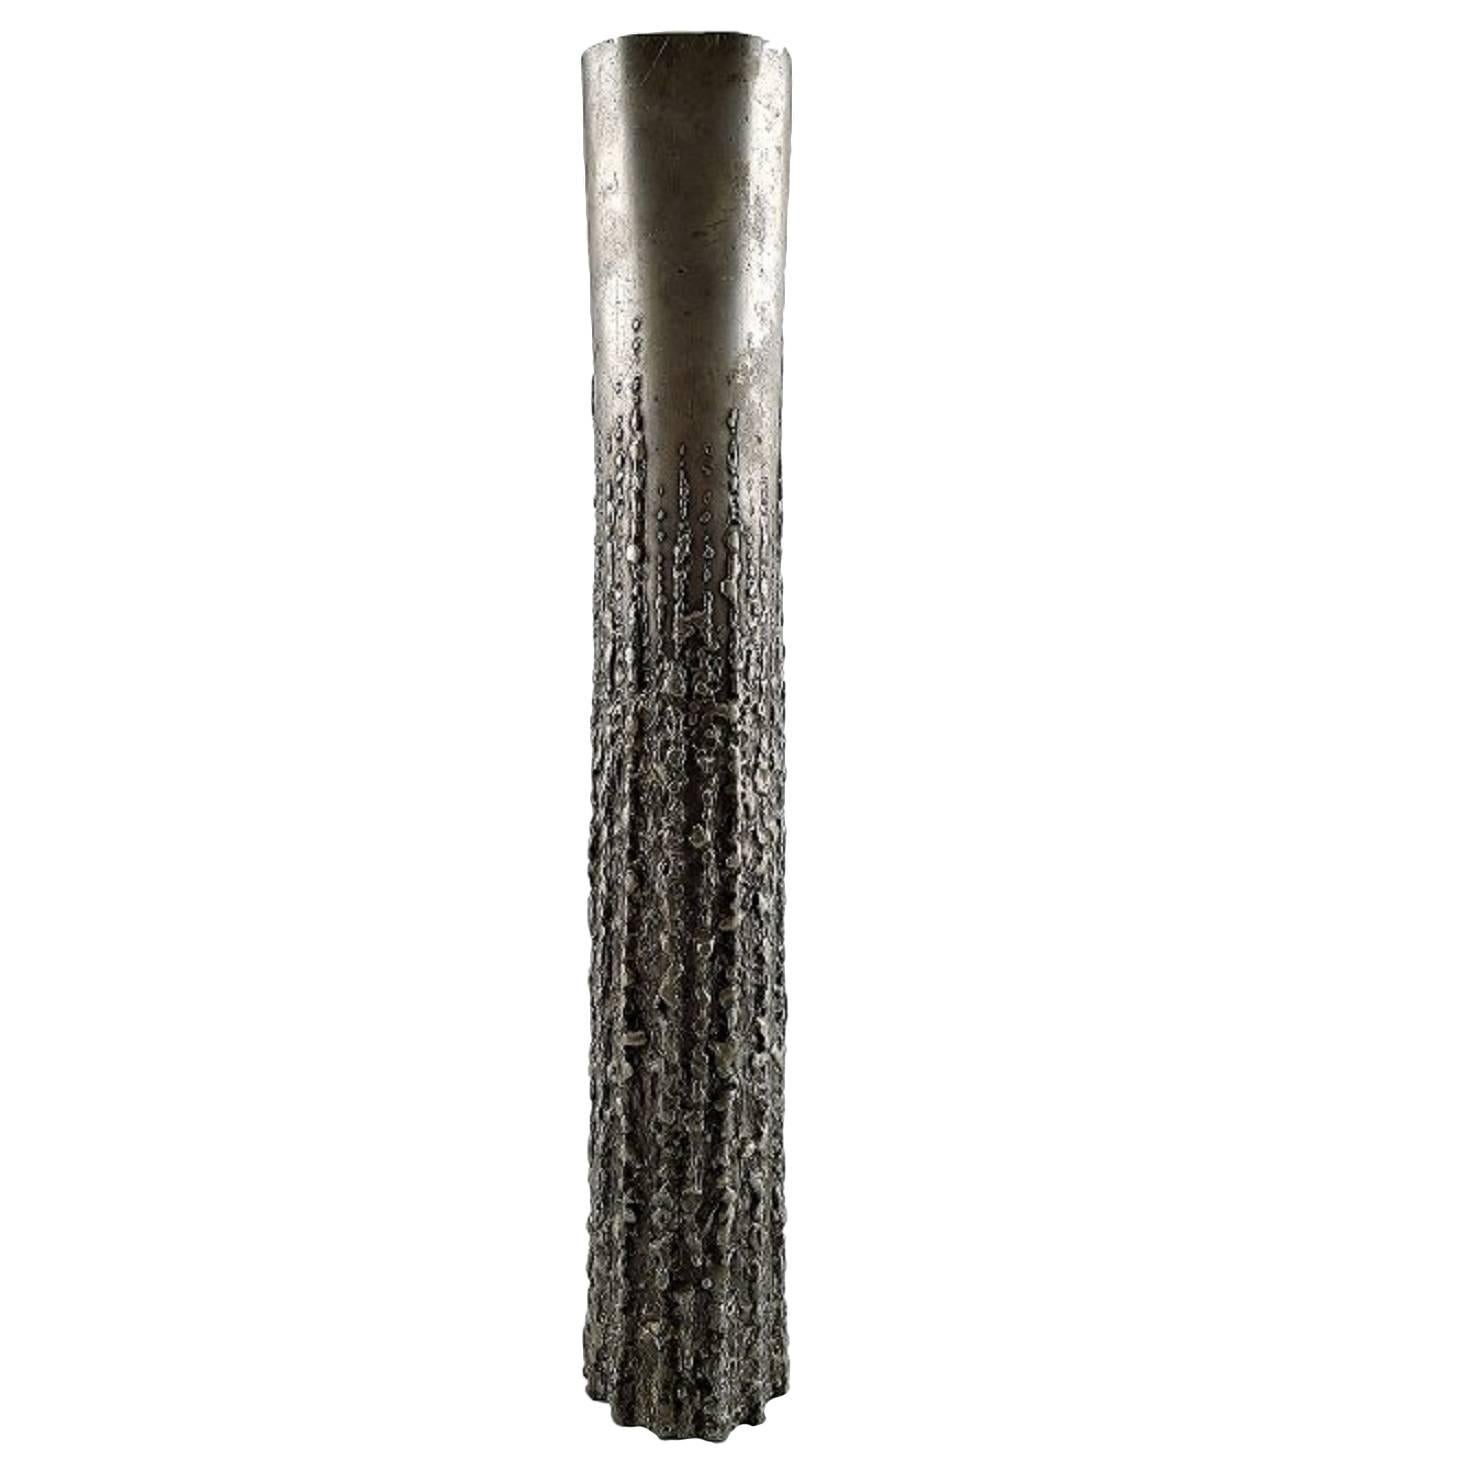 Large Vase of Pewter in Modern Design, France, Mid-20th Century For Sale